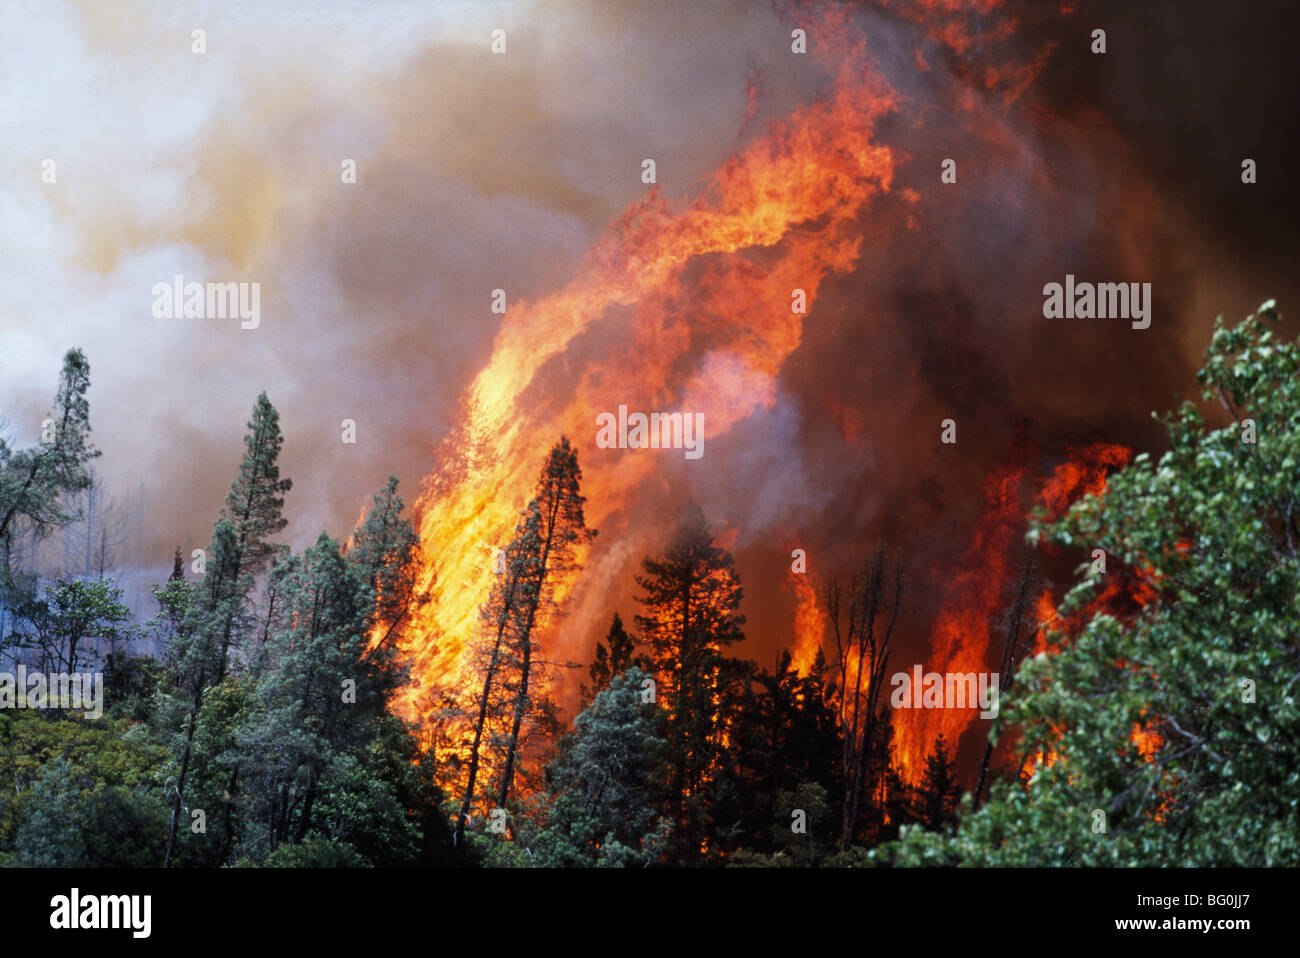 Huge flames from wildfire, Shasta-Trinity National Forest, California, USA Stock Photo